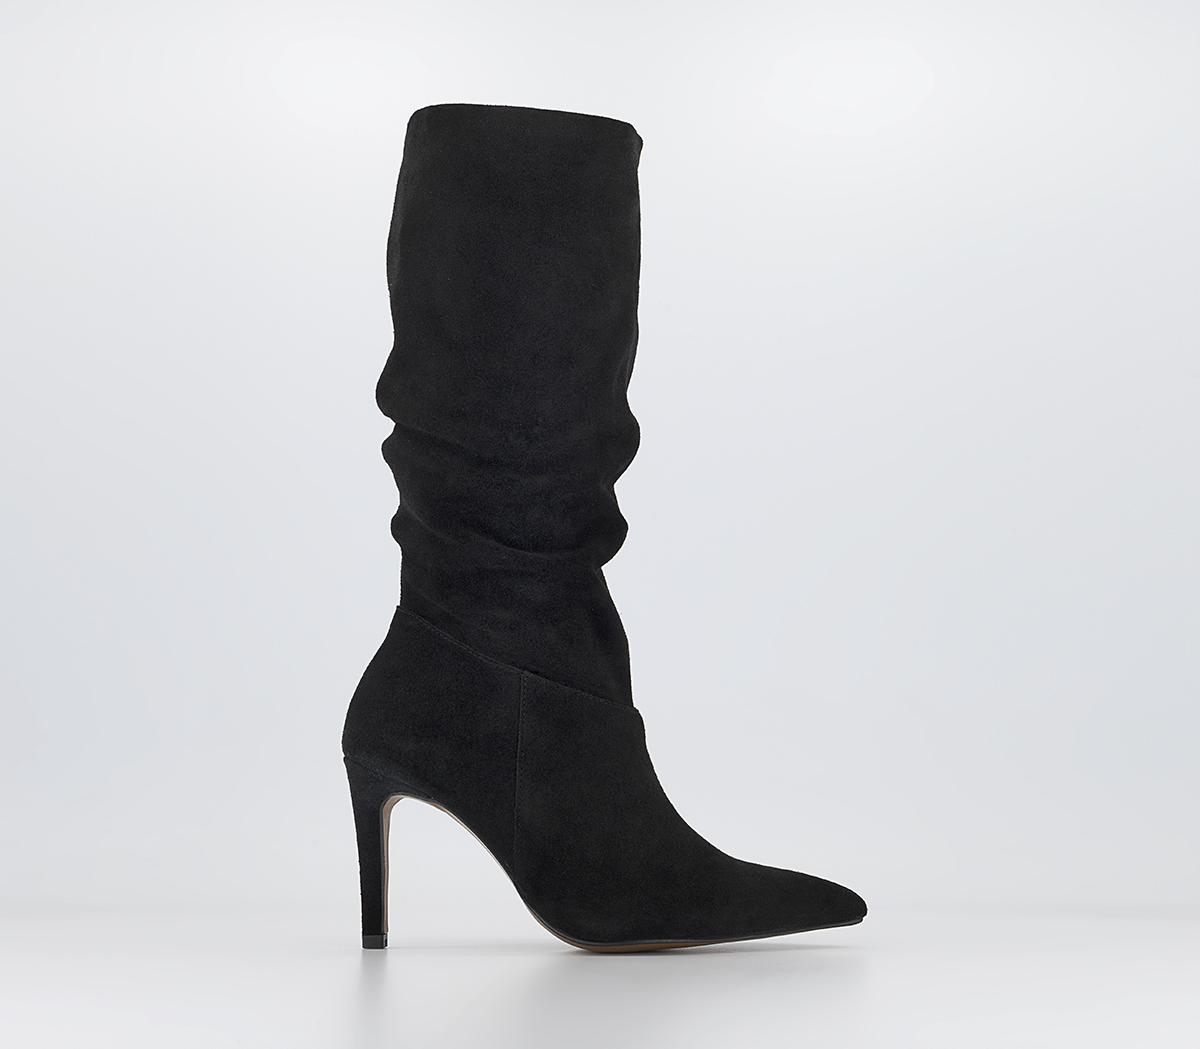 OFFICE Kiki Ruch Leg Knee Boots Black Suede - Knee High Boots